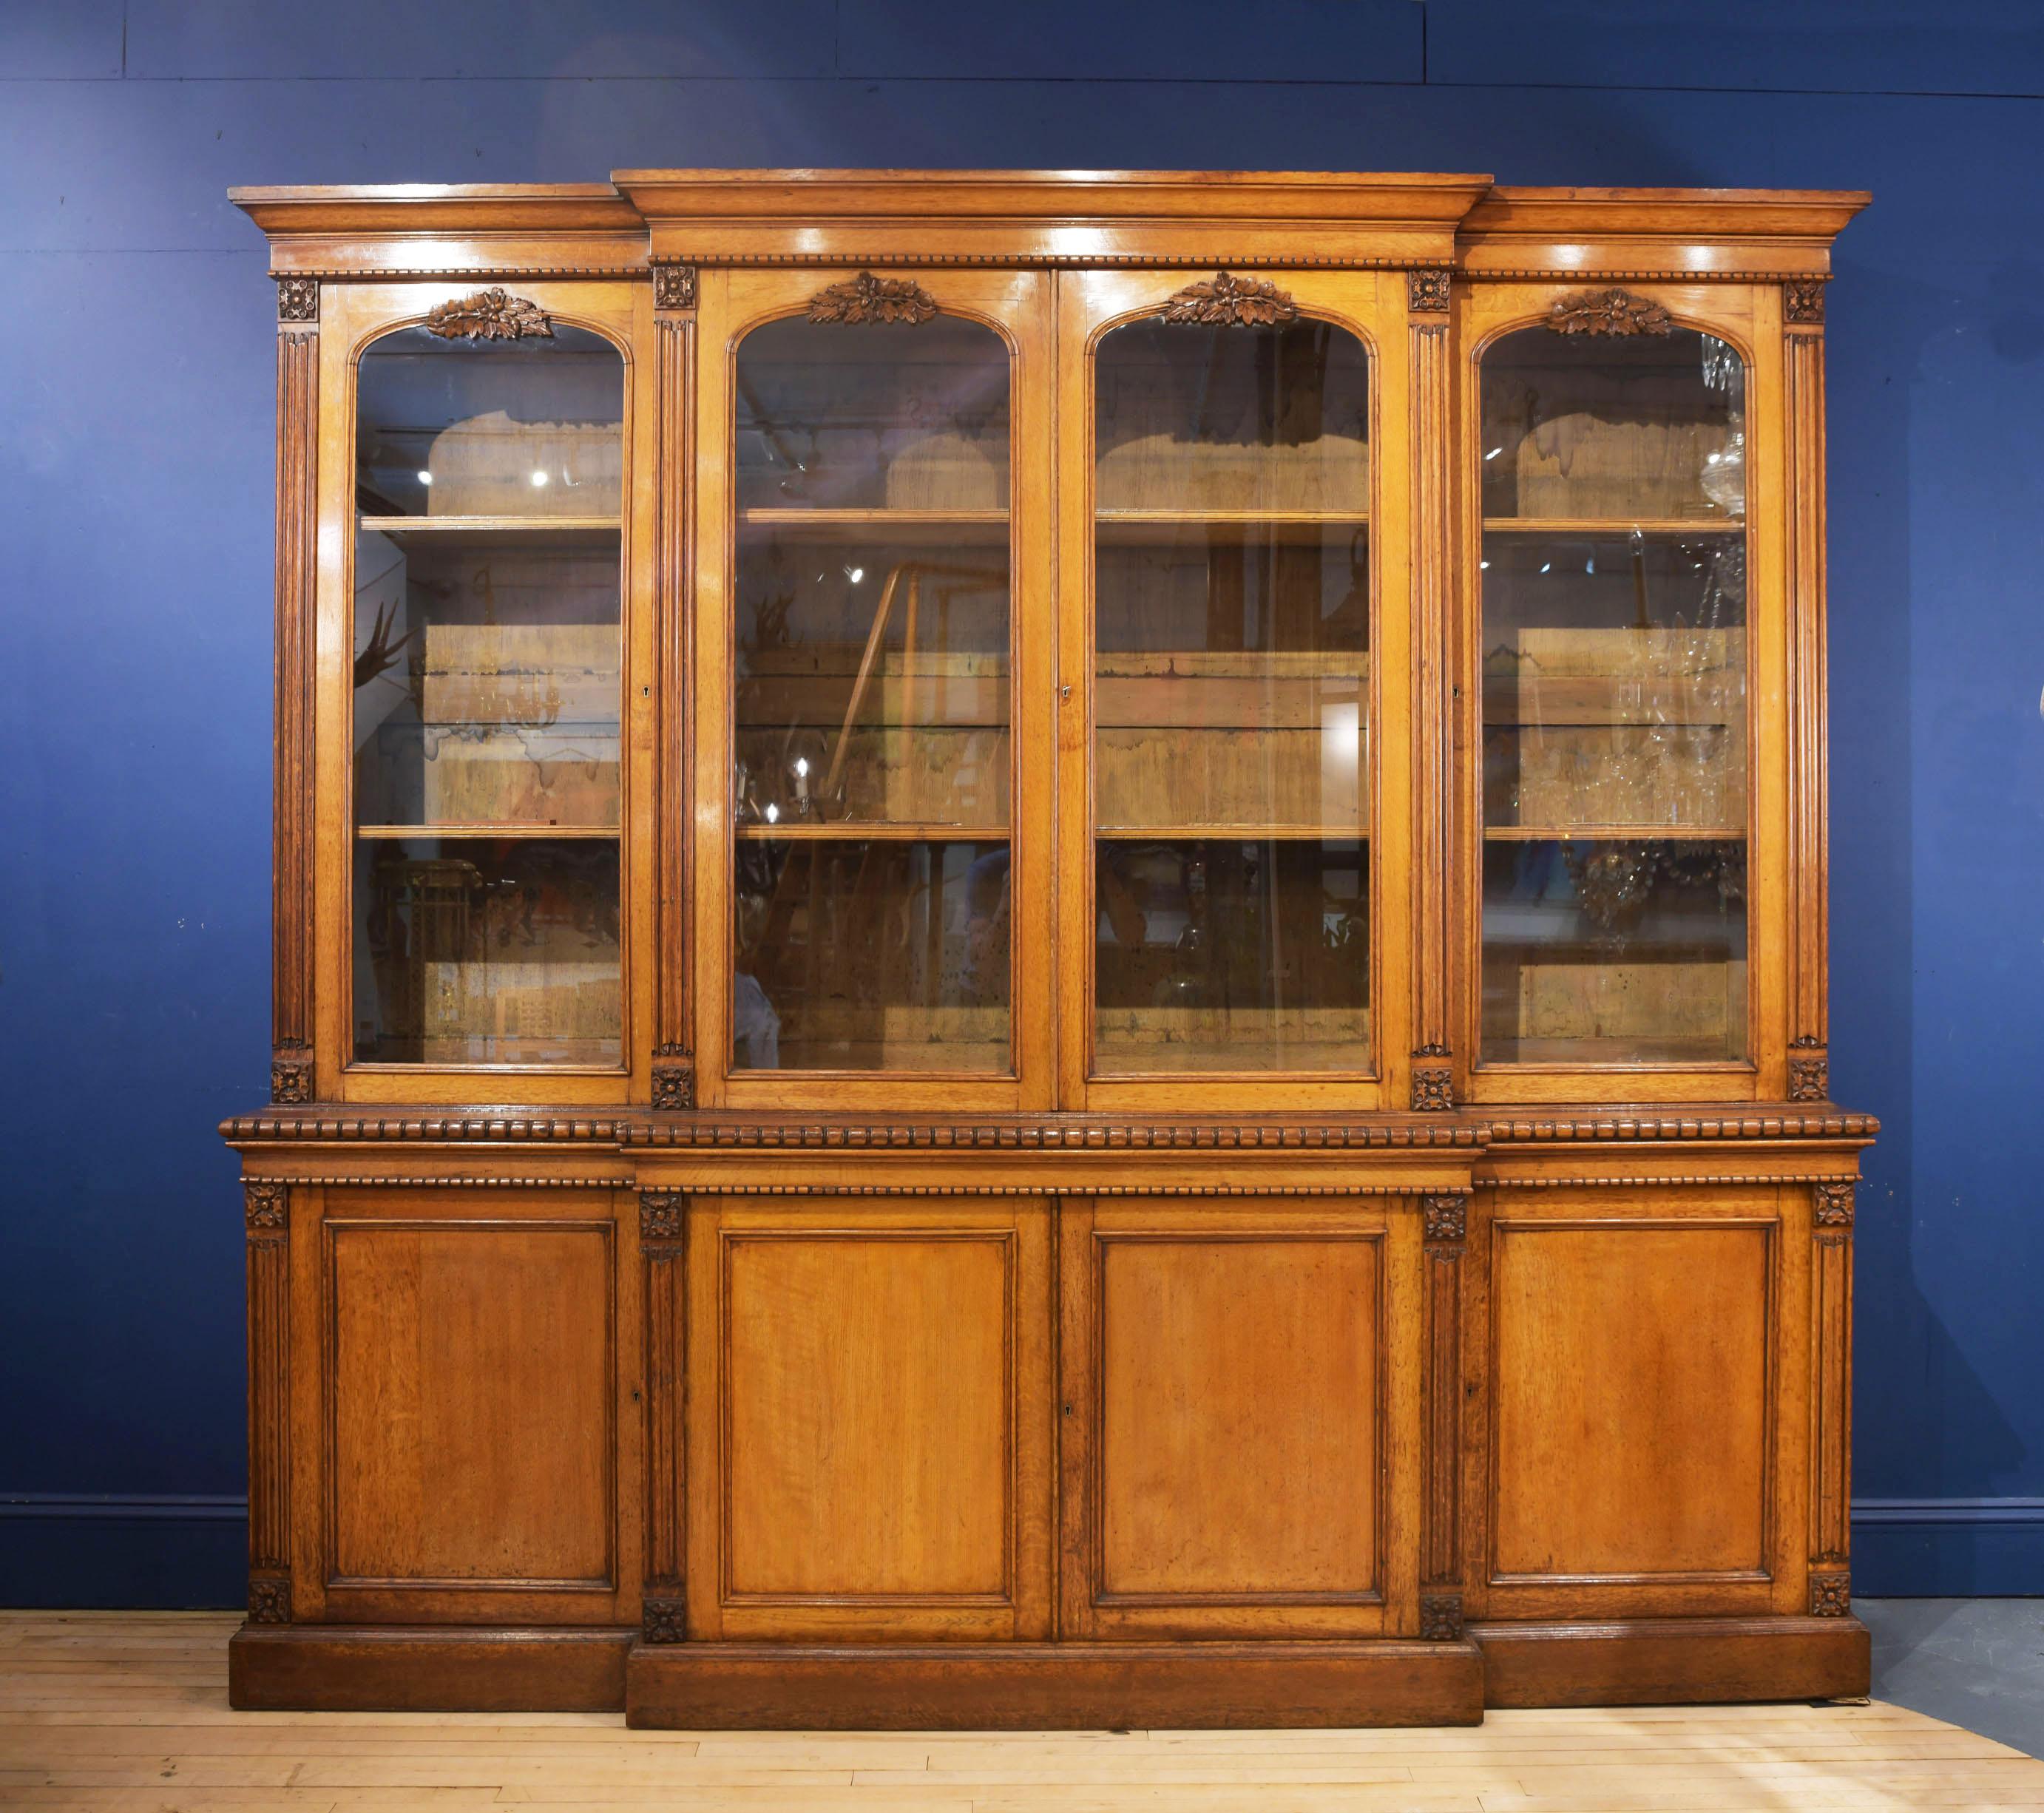 This magnificent and substantially sized English oak bookcase features linen fold carving and acorn leaf detailing above each glass panelled door. A lobe moulded edge divides the top and bottom section, both with adjustable shelves. The bookcase